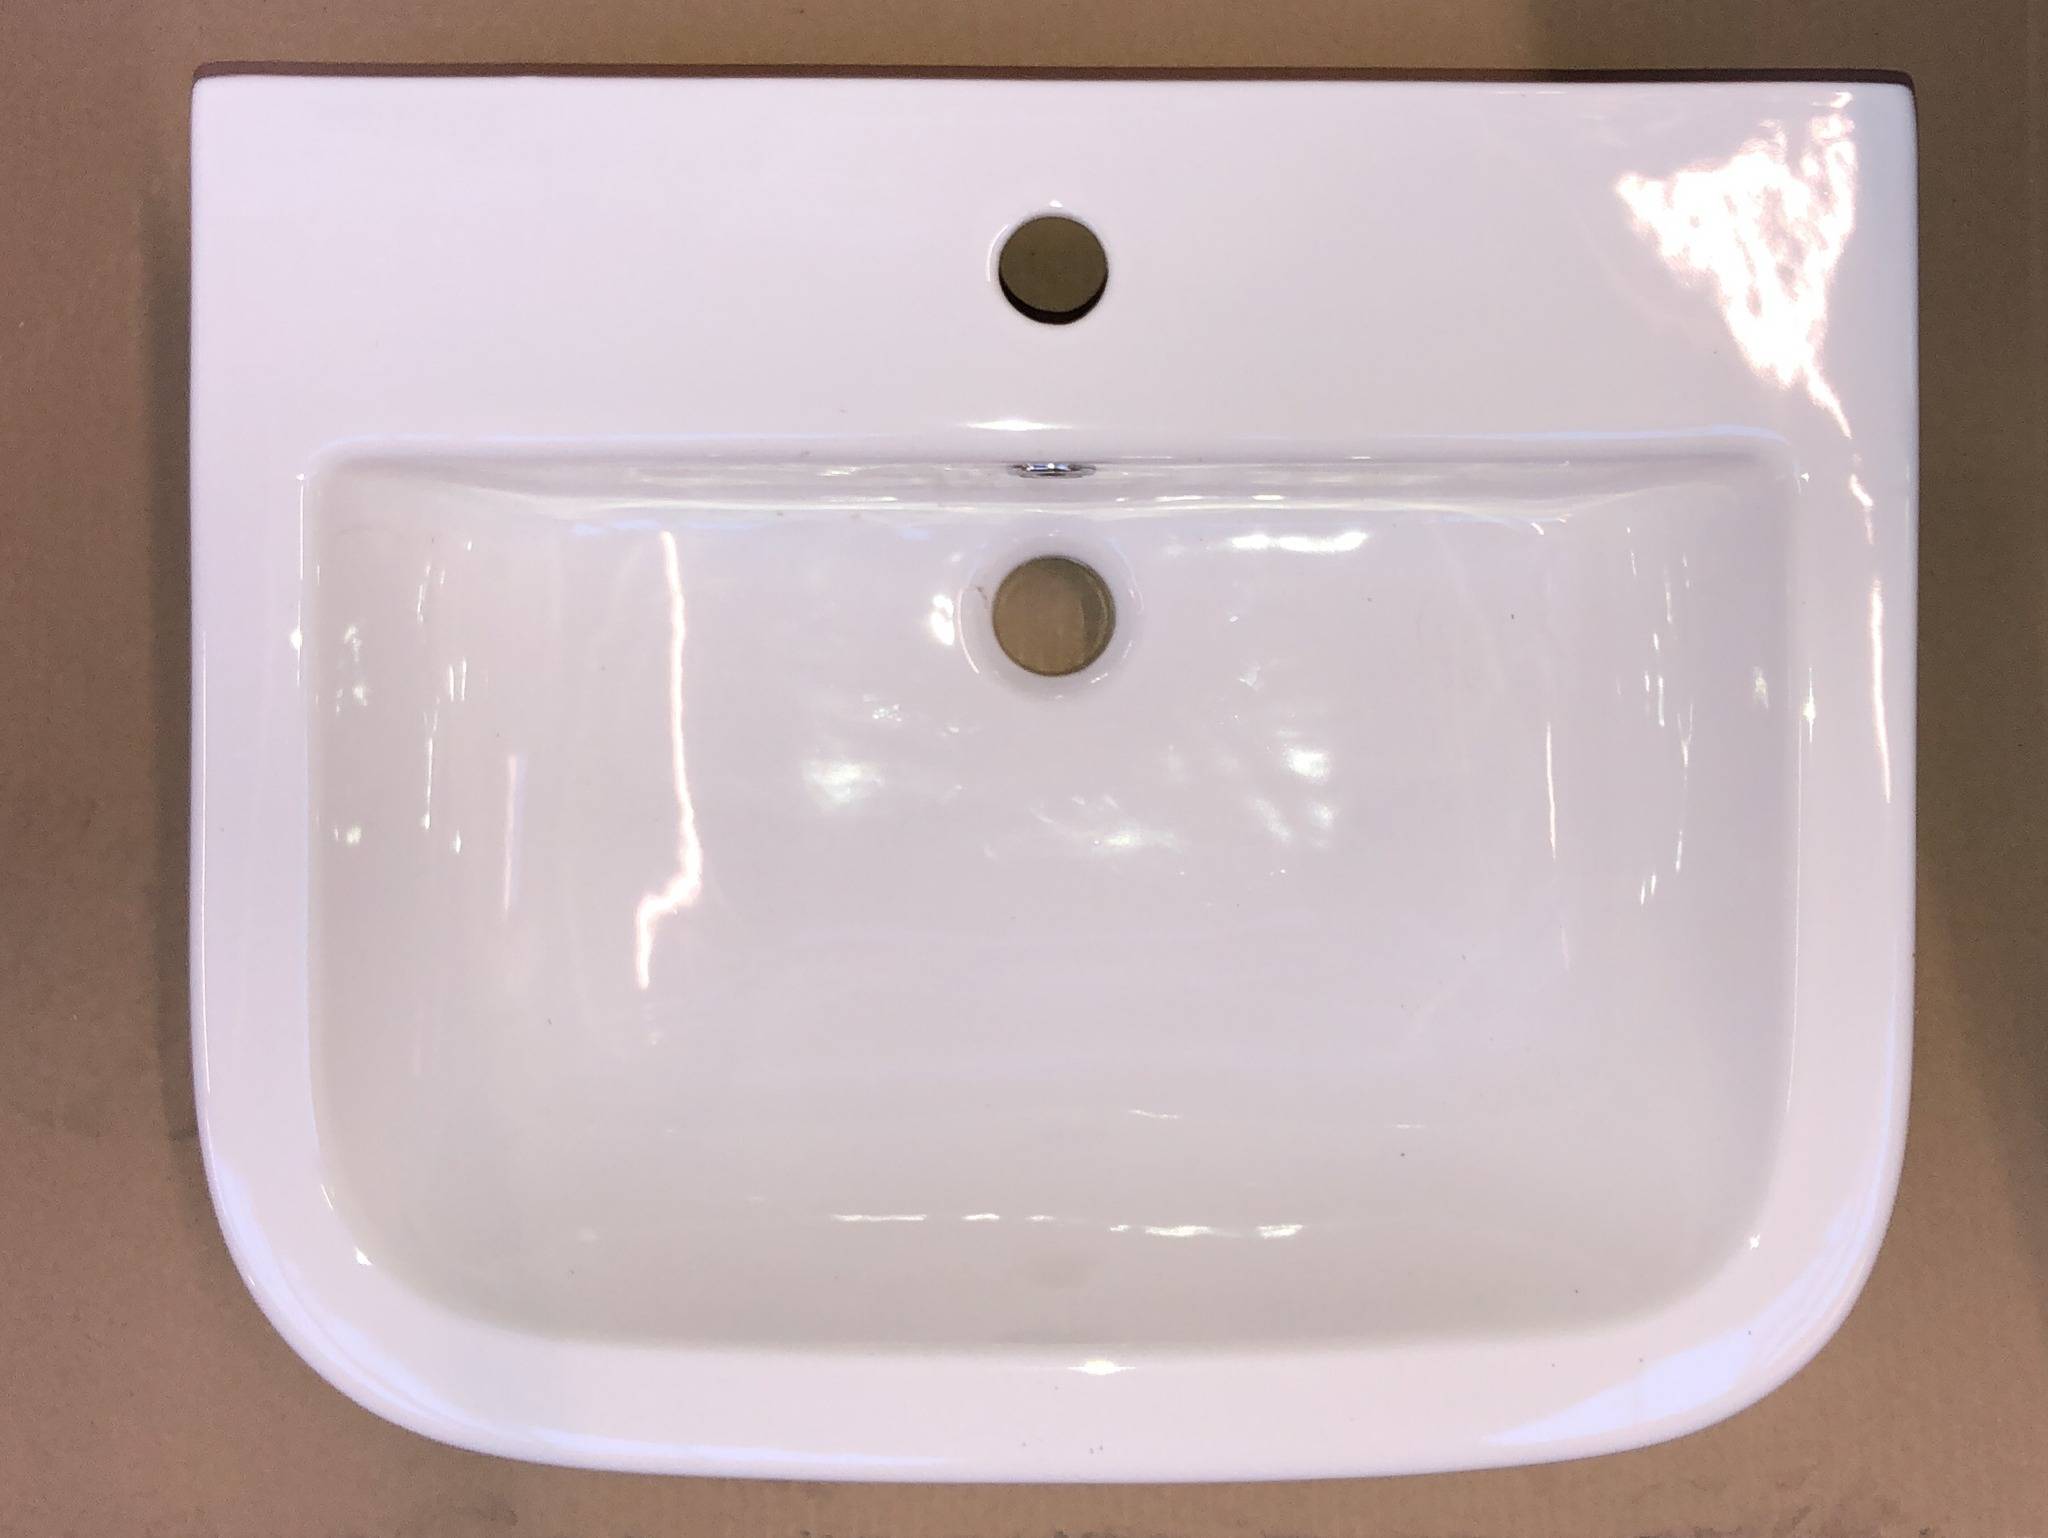 Cooke & Lewis Affini White Square Wall-mounted Cloakroom Basin Vitreous China (W)57cm 0354